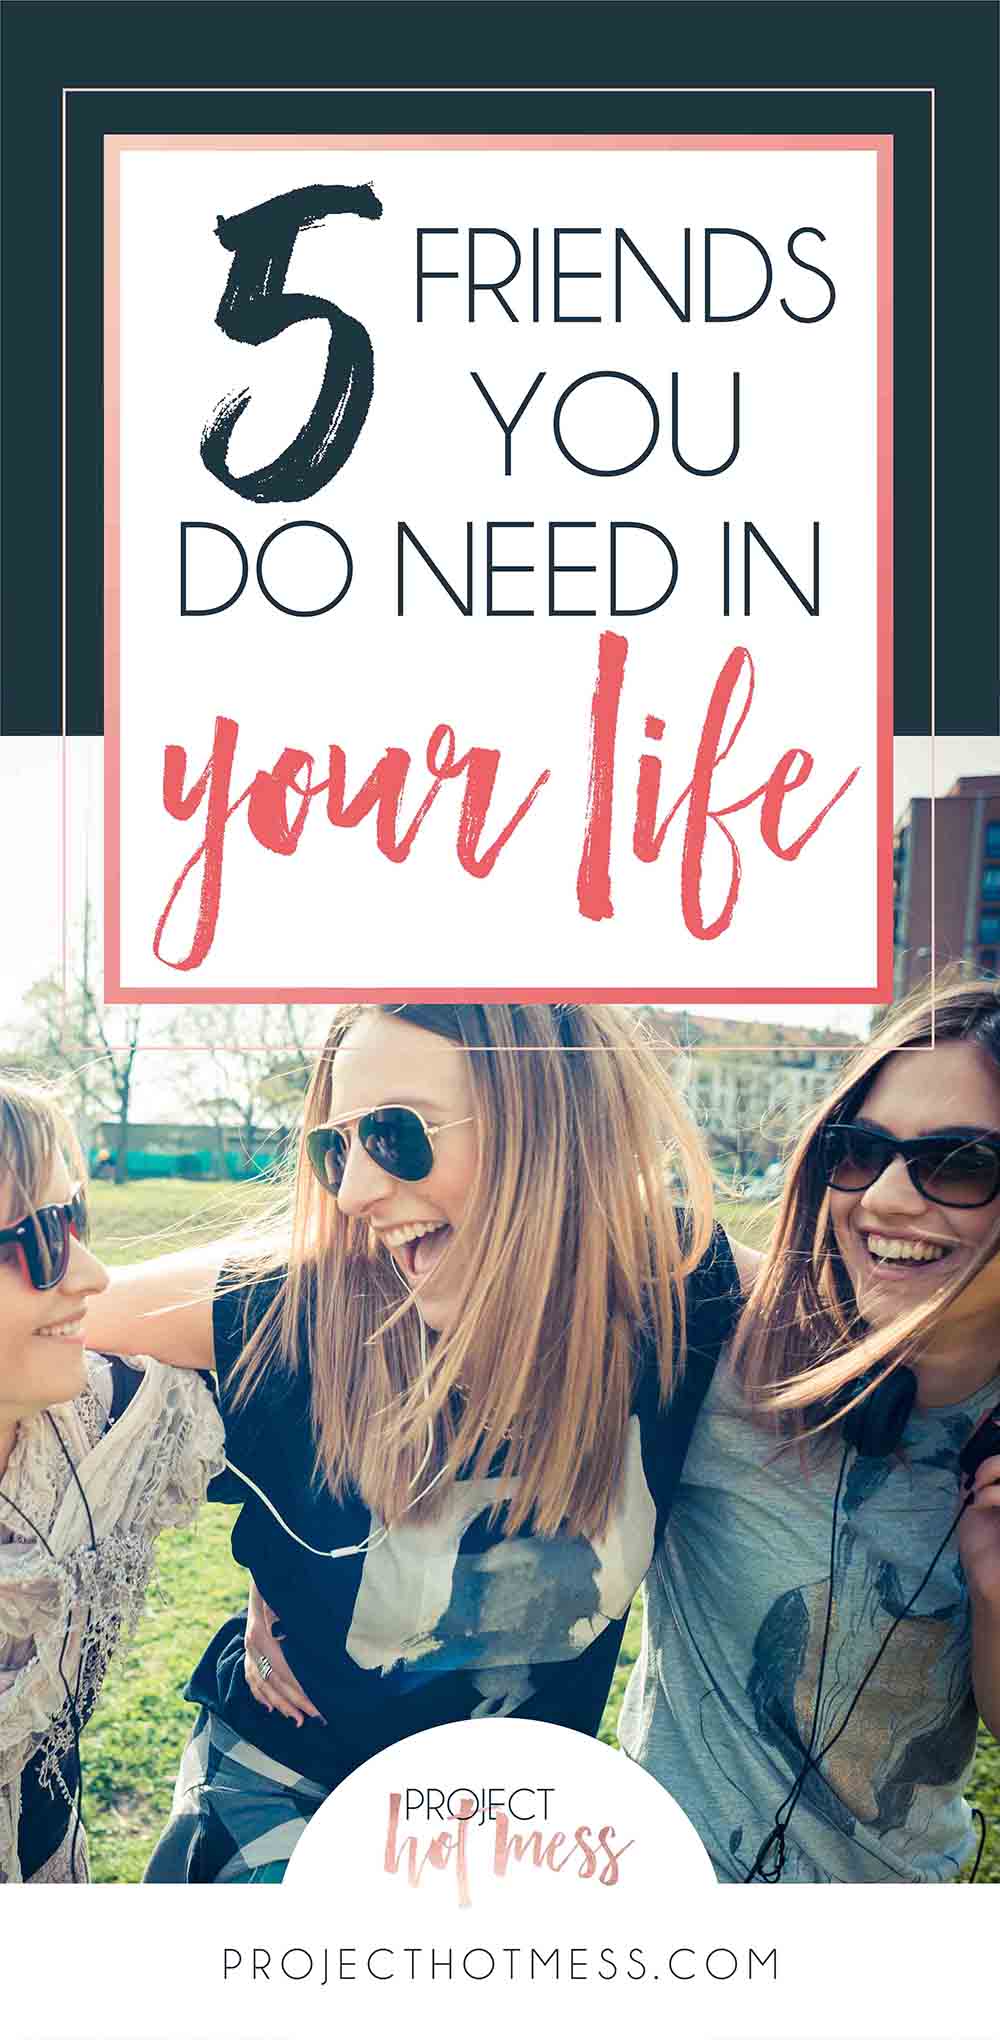 While sometimes it's easy to just focus on the people who are toxic and draining, it's also important to acknowledge the friends you do need in your life! And we think everyone needs these 5 people in their life!